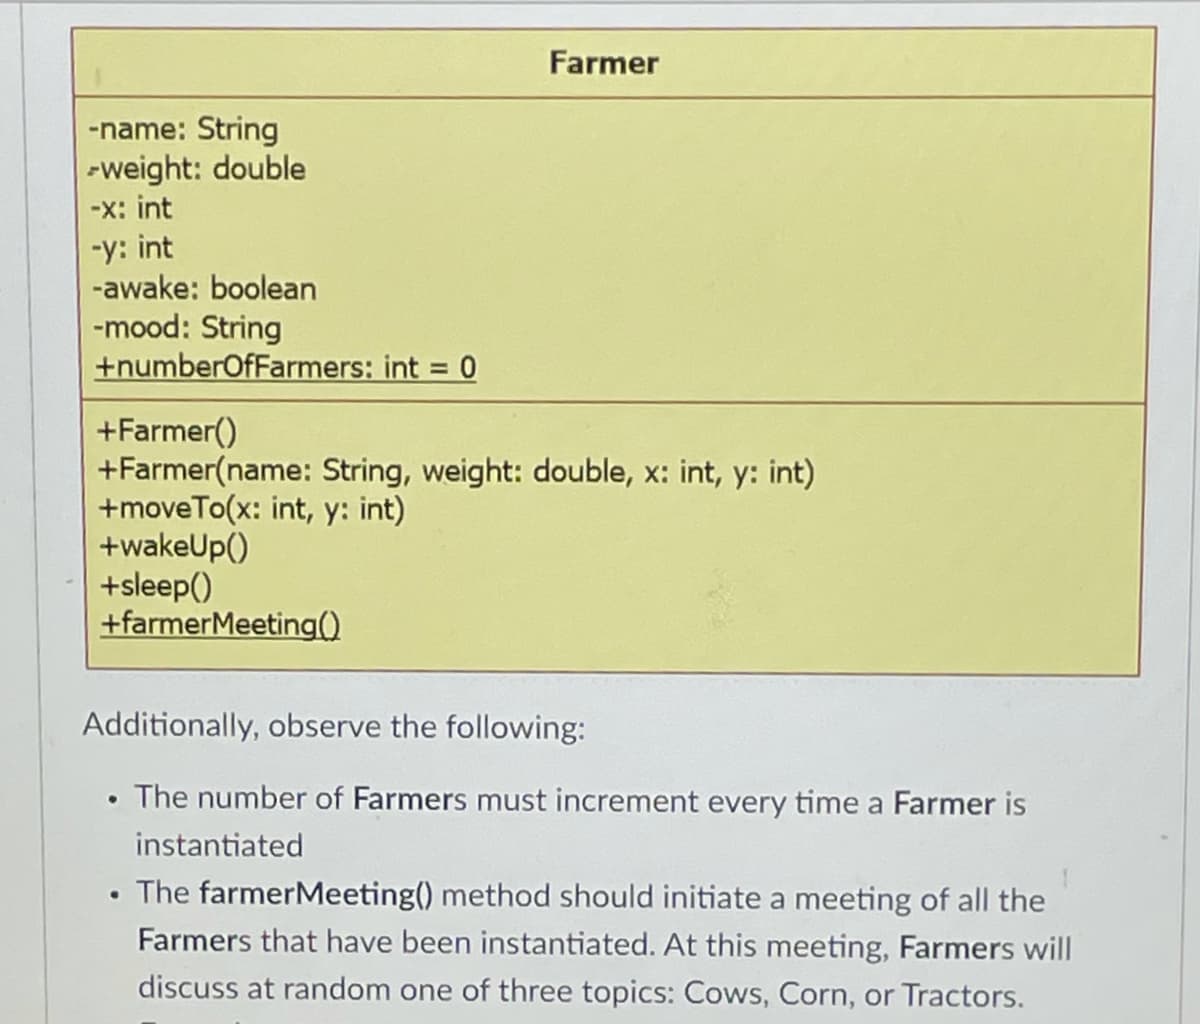 Farmer
-name: String
-weight: double
-x: int
-y: int
-awake: boolean
-mood: String
+numberOfFarmers: int = 0
%3D
+Farmer()
+Farmer(name: String, weight: double, x: int, y: int)
+moveTo(x: int, y: int)
+wakeUp()
+sleep()
+farmerMeeting()
Additionally, observe the following:
The number of Farmers must increment every time a Farmer is
instantiated
The farmerMeeting() method should initiate a meeting of all the
Farmers that have been instantiated. At this meeting, Farmers will
discuss at random one of three topics: Cows, Corn, or Tractors.
